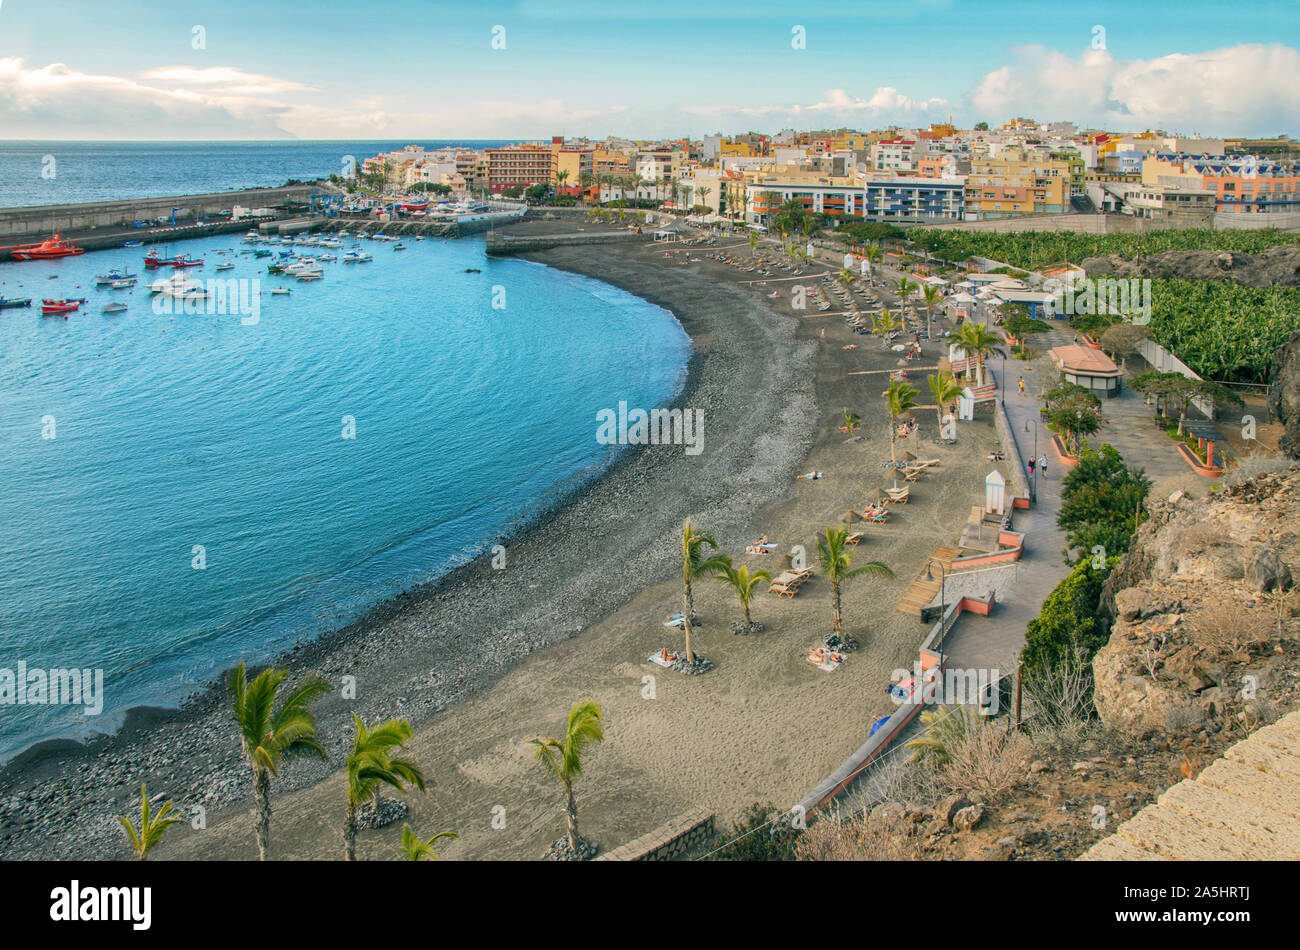 View Of Playa De San Juan This Beach With Gold Sand Located In Guia De Isora On The South West Coast Of Tenerife Canary Islands Stock Photo Alamy